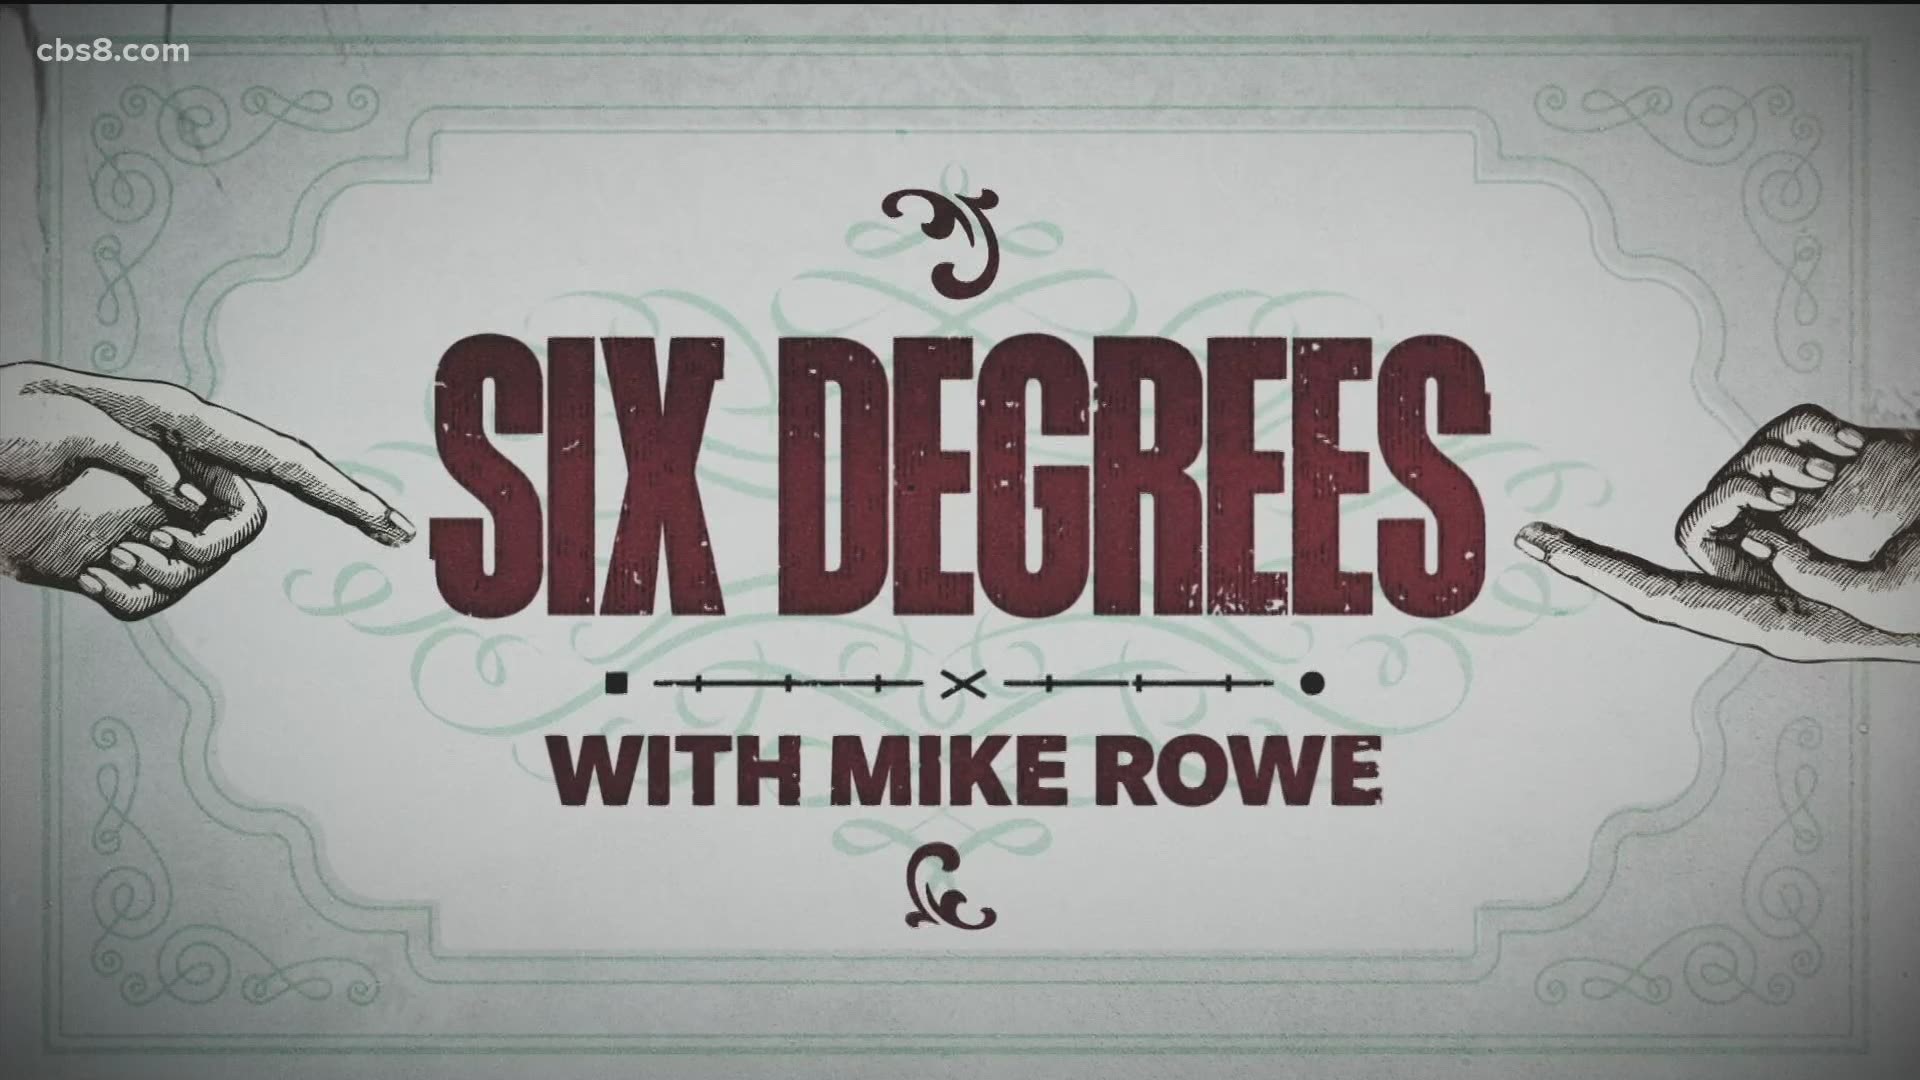 You know him best from his hit show called "Dirty Jobs," but now host, author and producer Mike Rowe has a new show out called 'Six Degrees of Mike Rowe'.